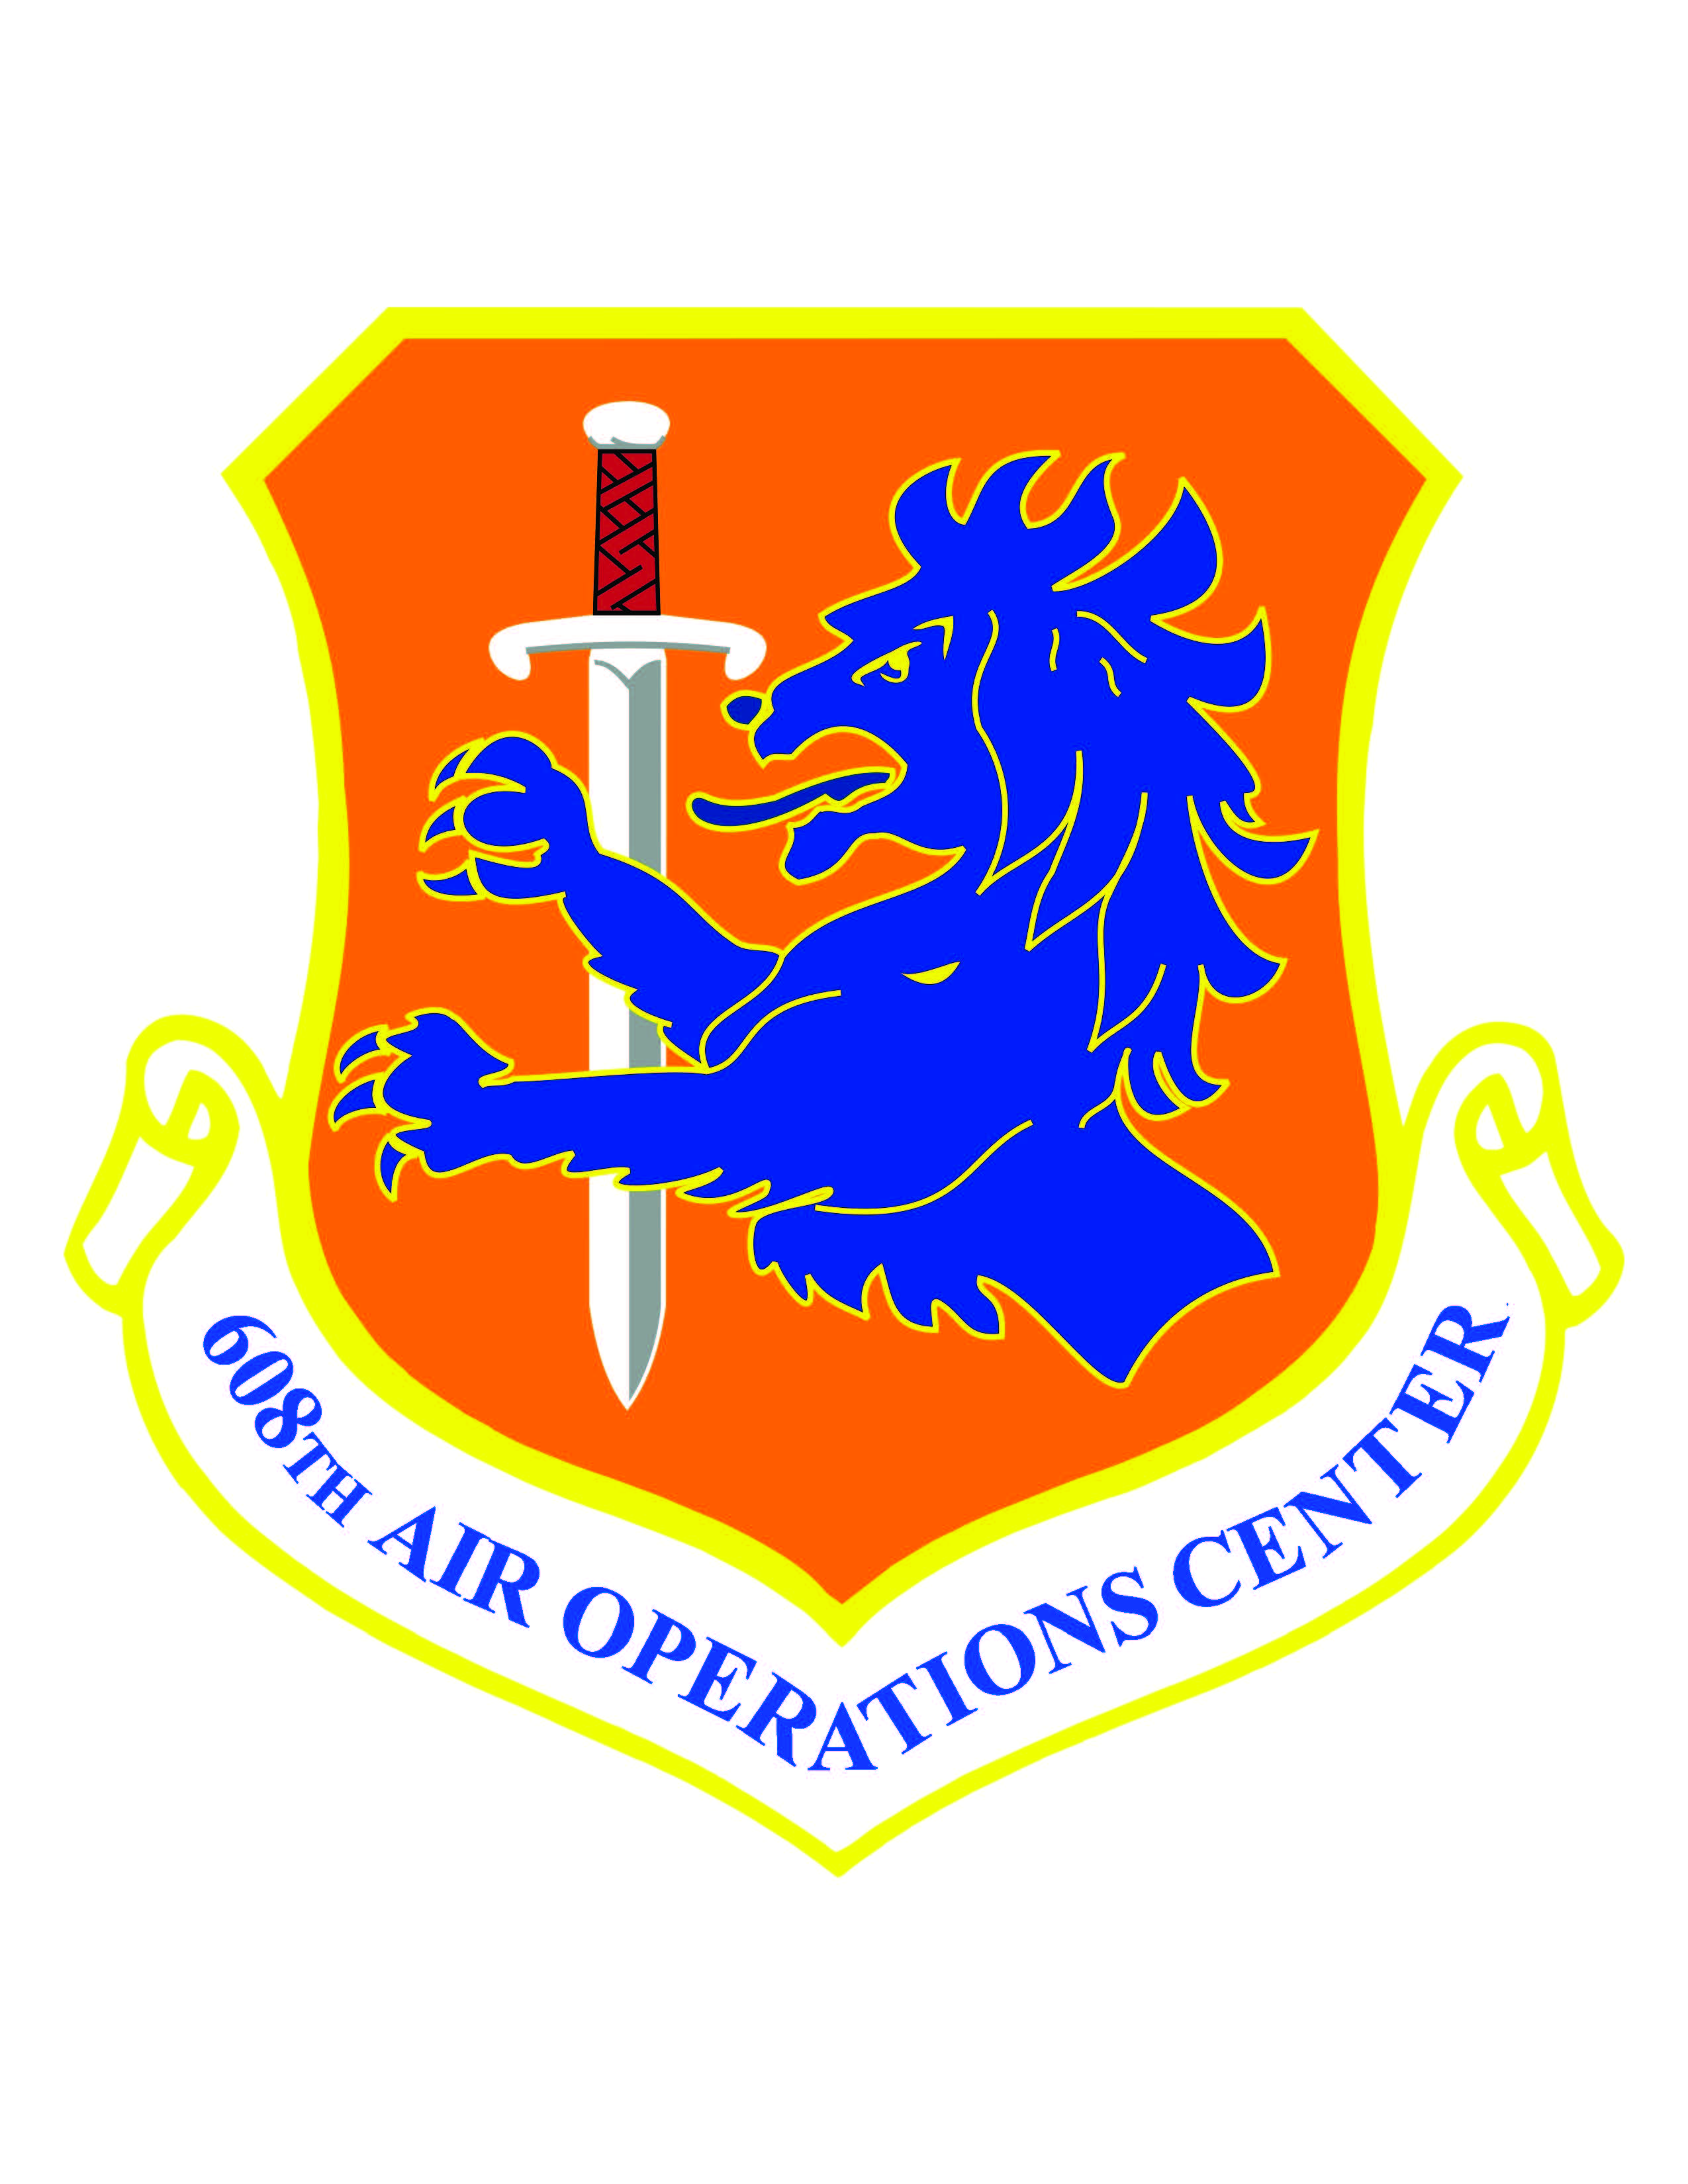 608th Air Operations Center